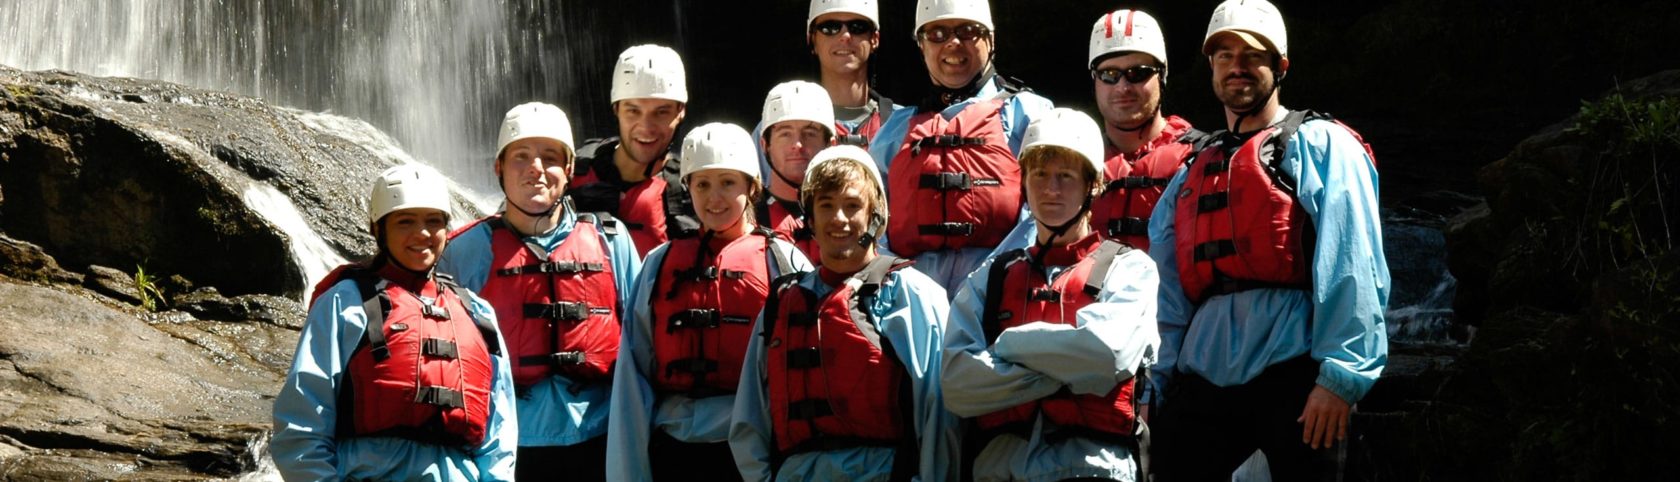 paddlers wearing helmets, life jackets, and wetsuits